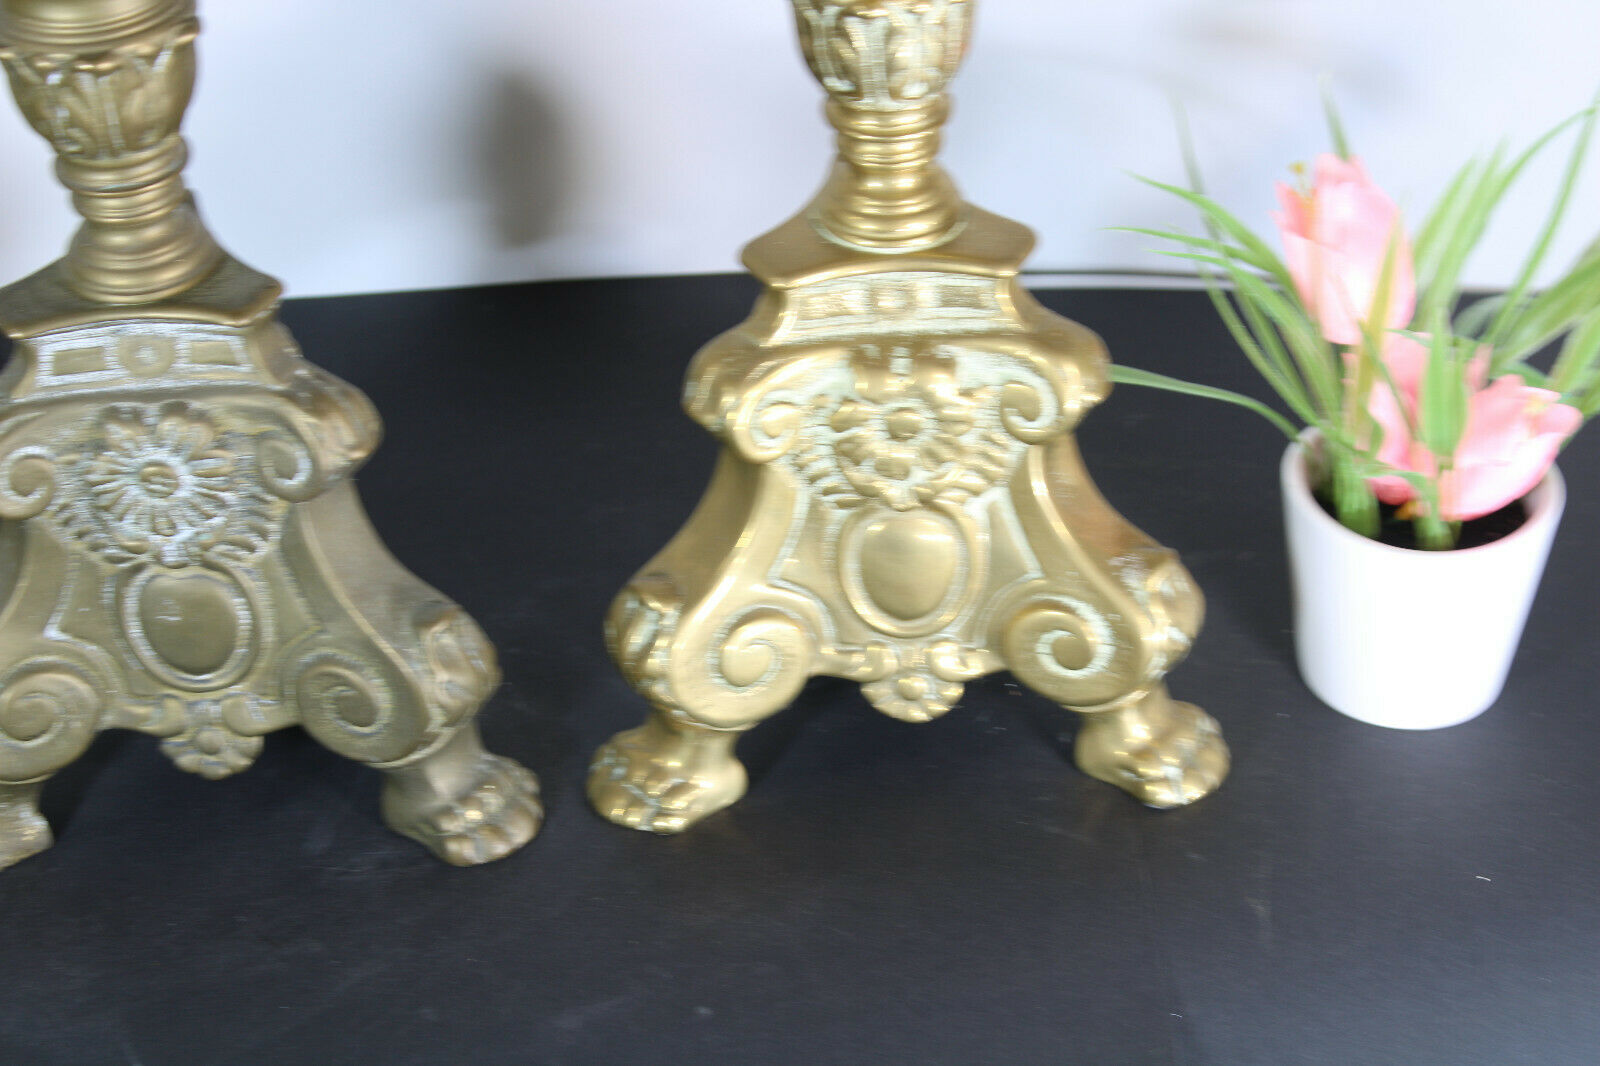 2 Antique French Brass Candlesticks, 1850s Candle Holder Set